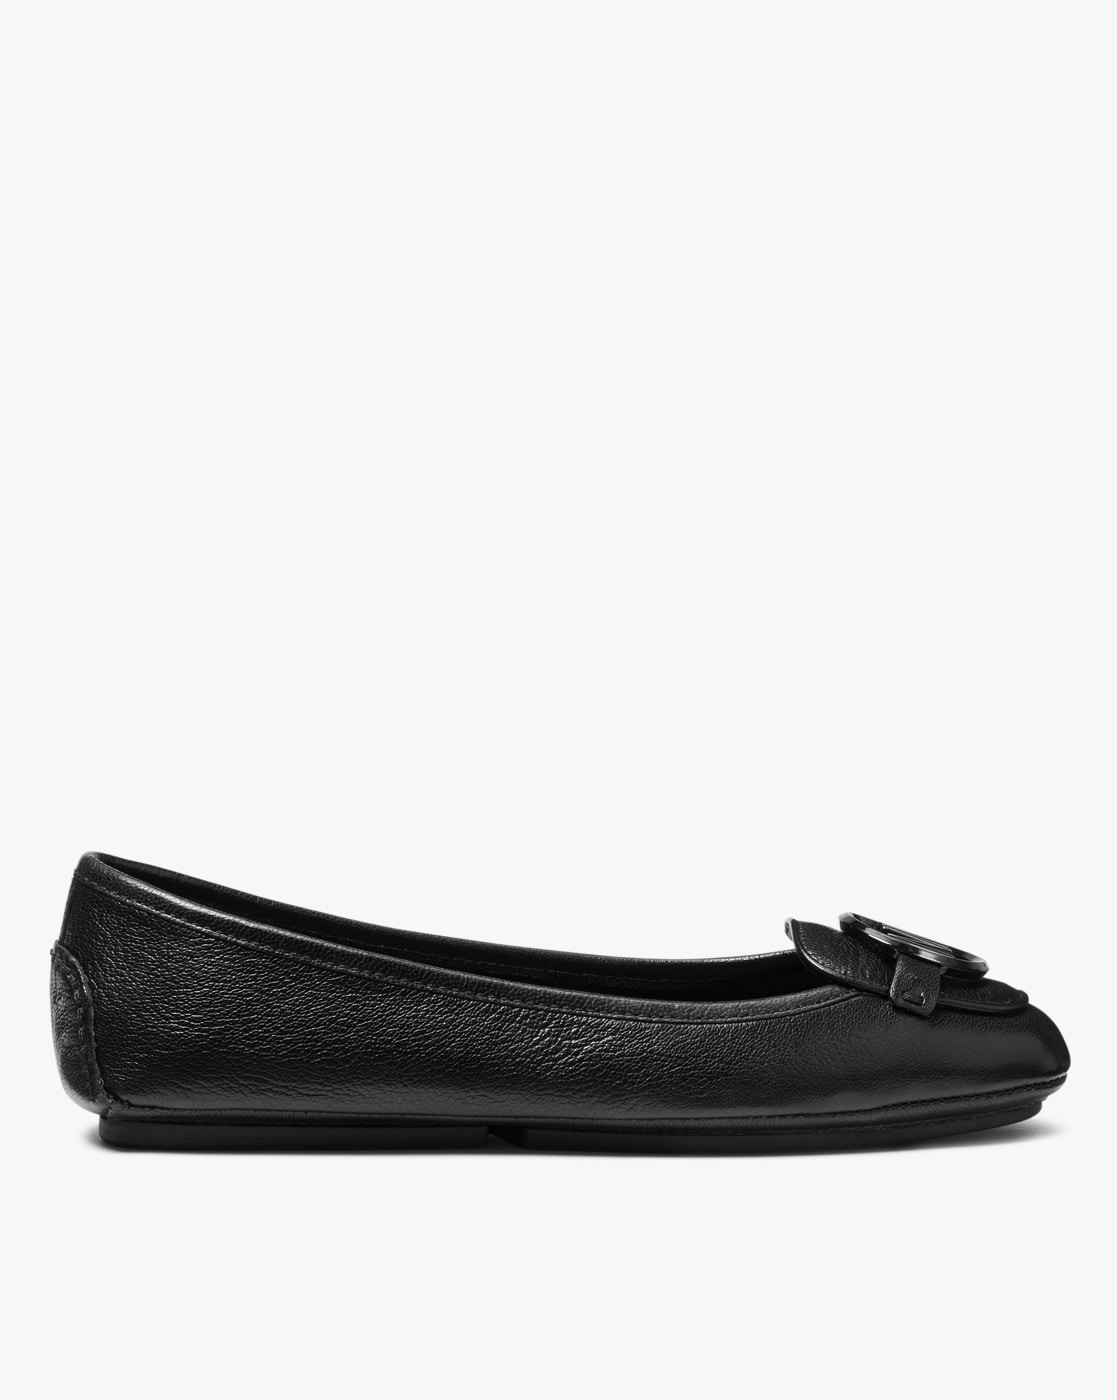 Lilley Womens Black Patent Ballerina with Bow 